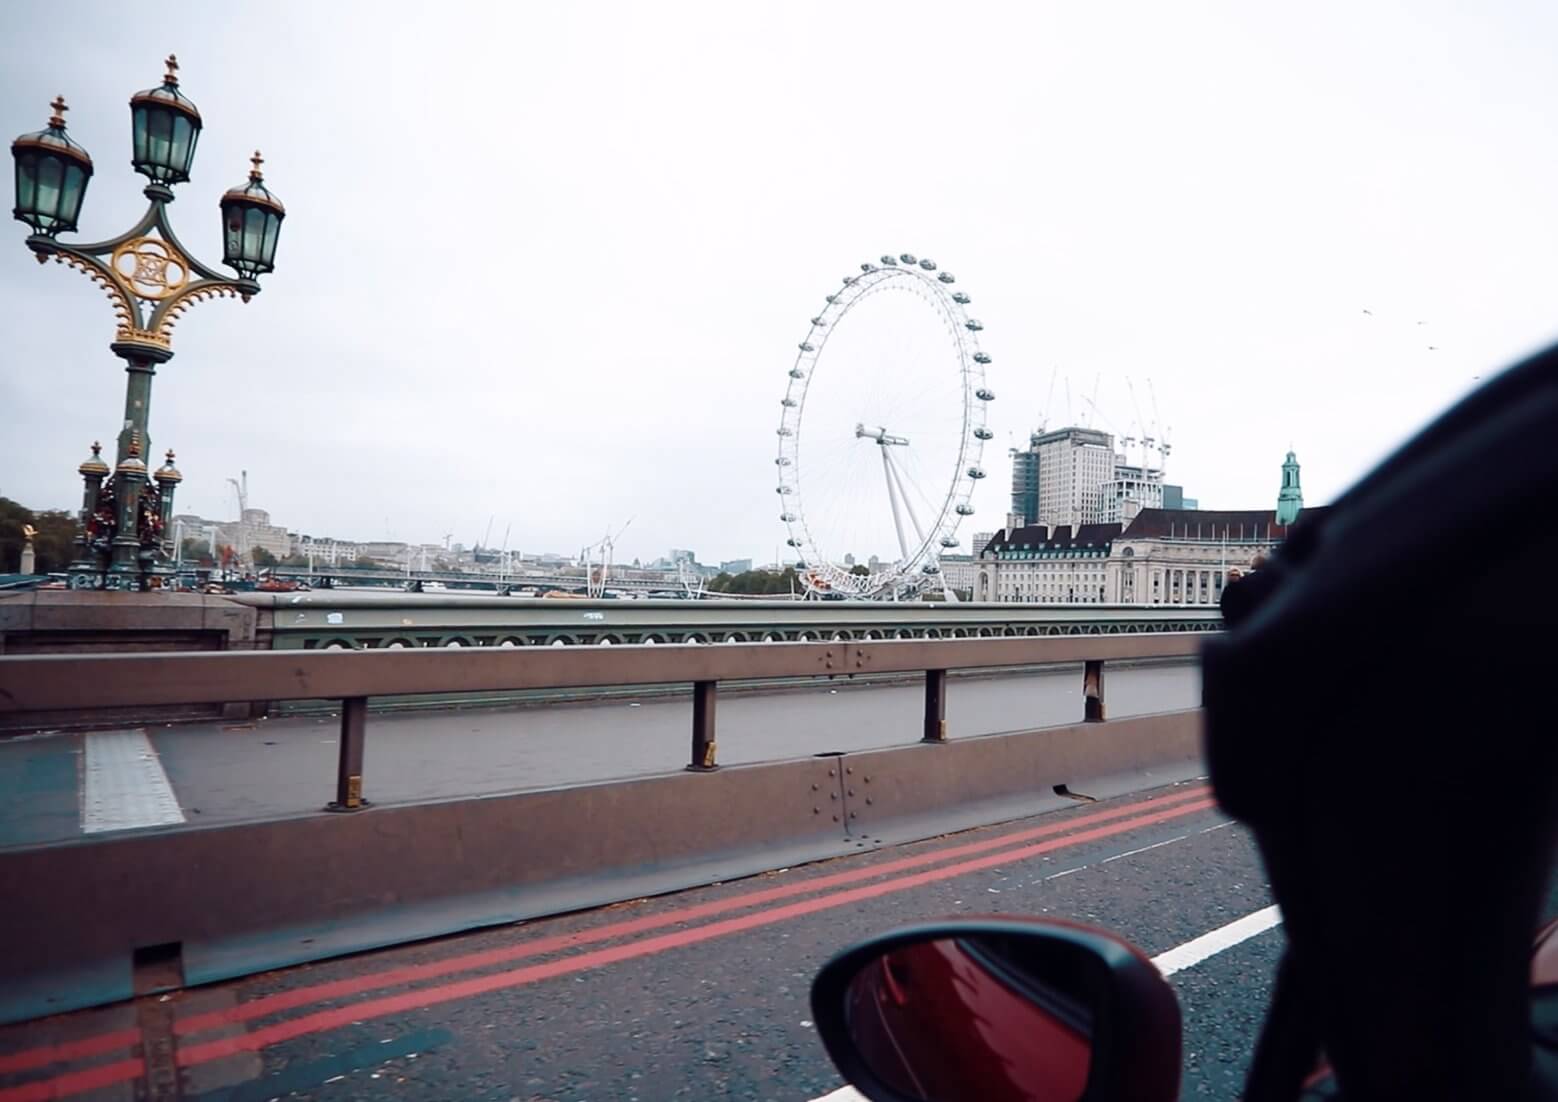 An open top car tour of London's iconic landmarks and landscapes